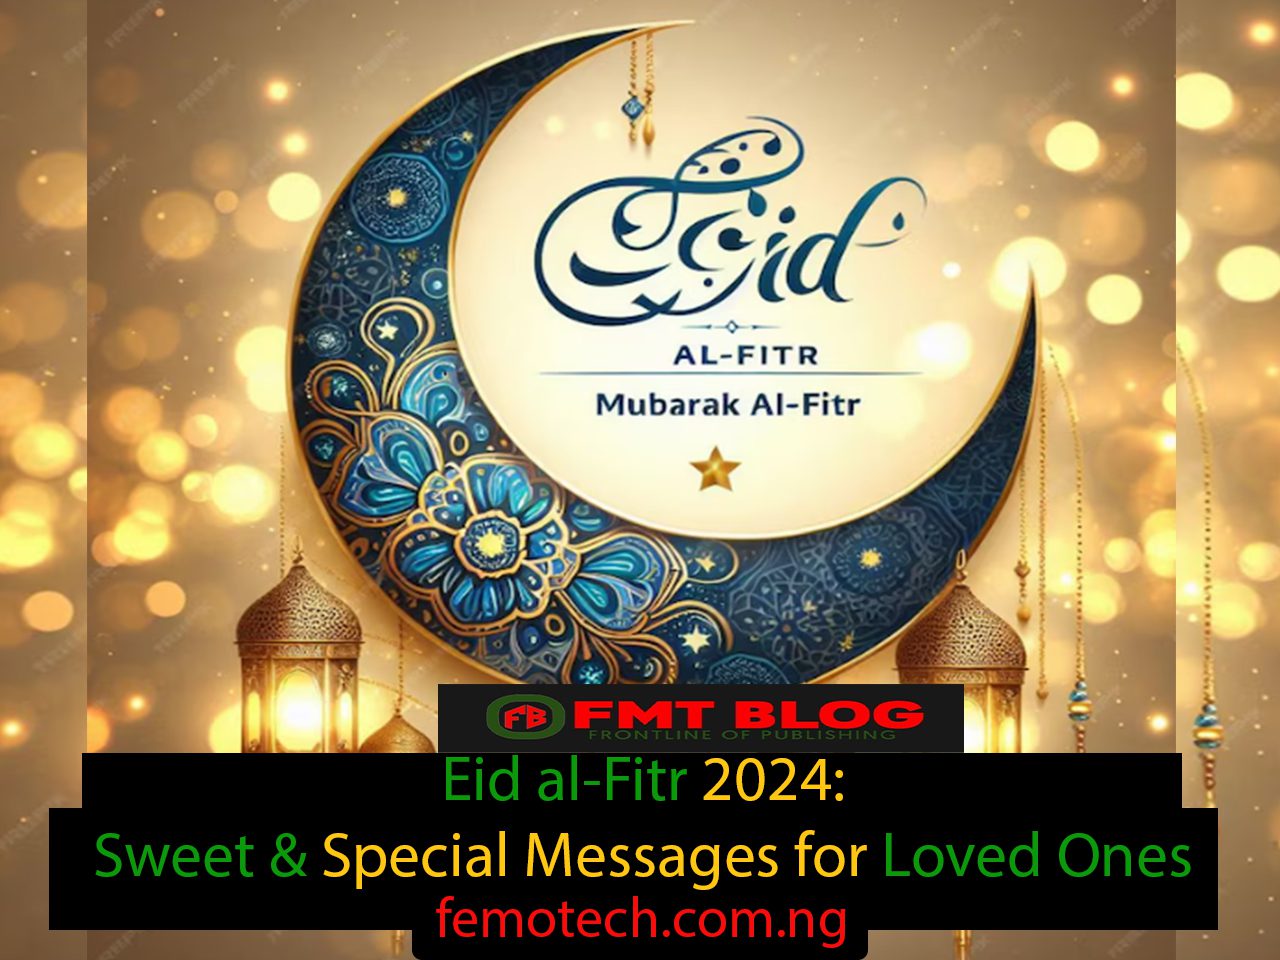 Eid al-Fitr 2024: Sweet & Special Messages for Loved Ones